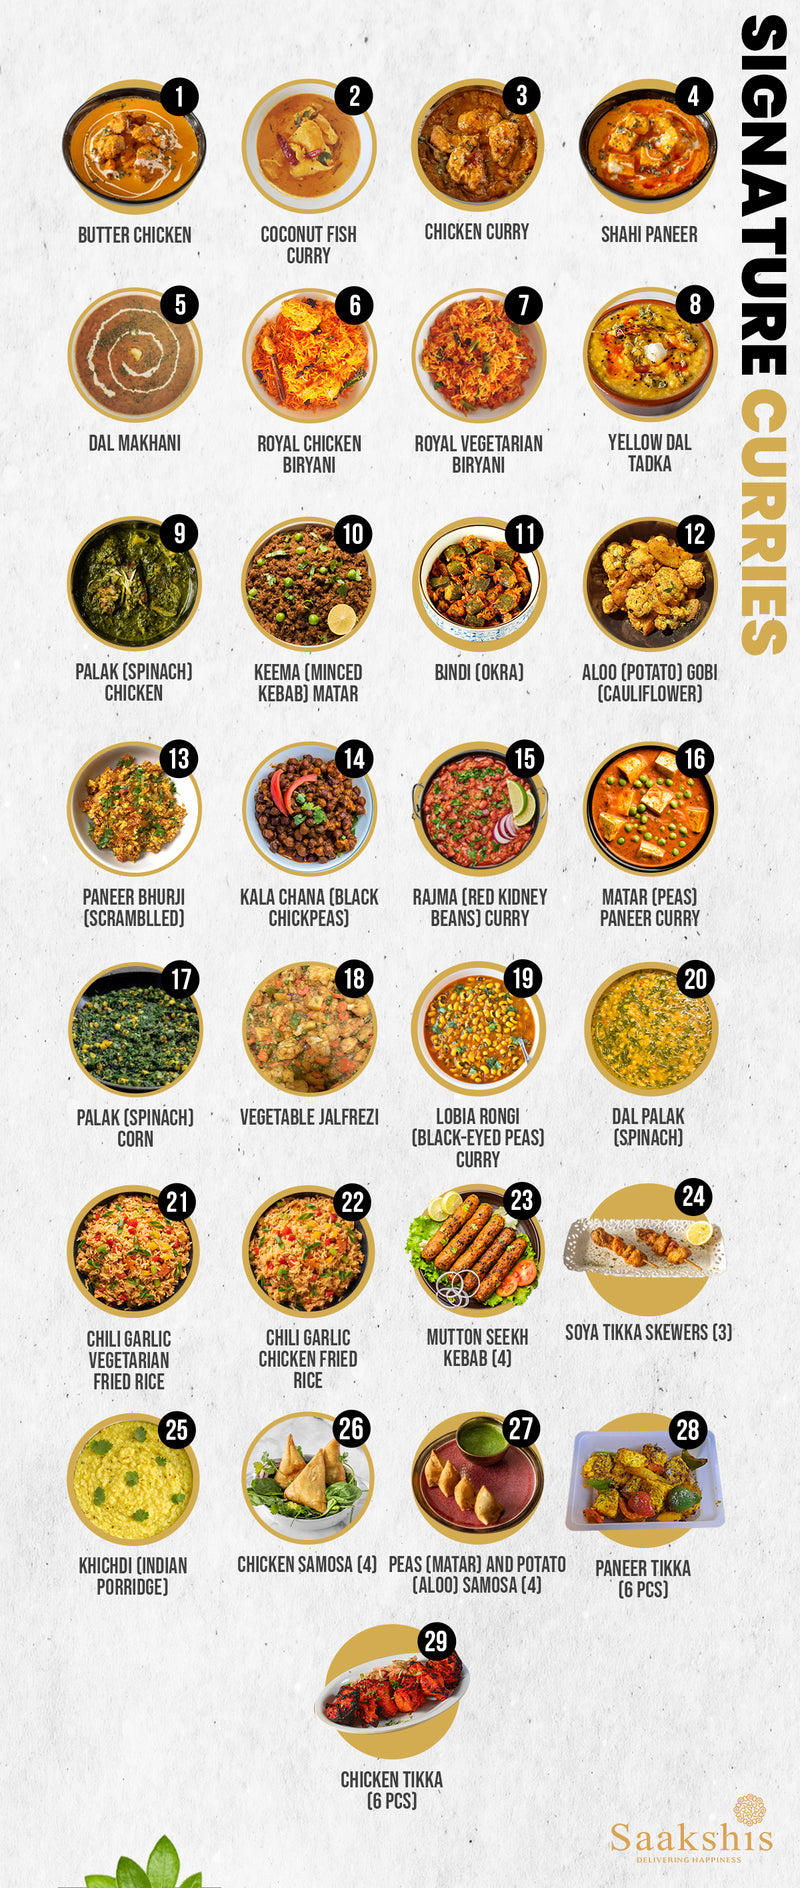 SIGNATURE CURRIES MIX & MATCH 7 WEEKLY MEALS PLAN